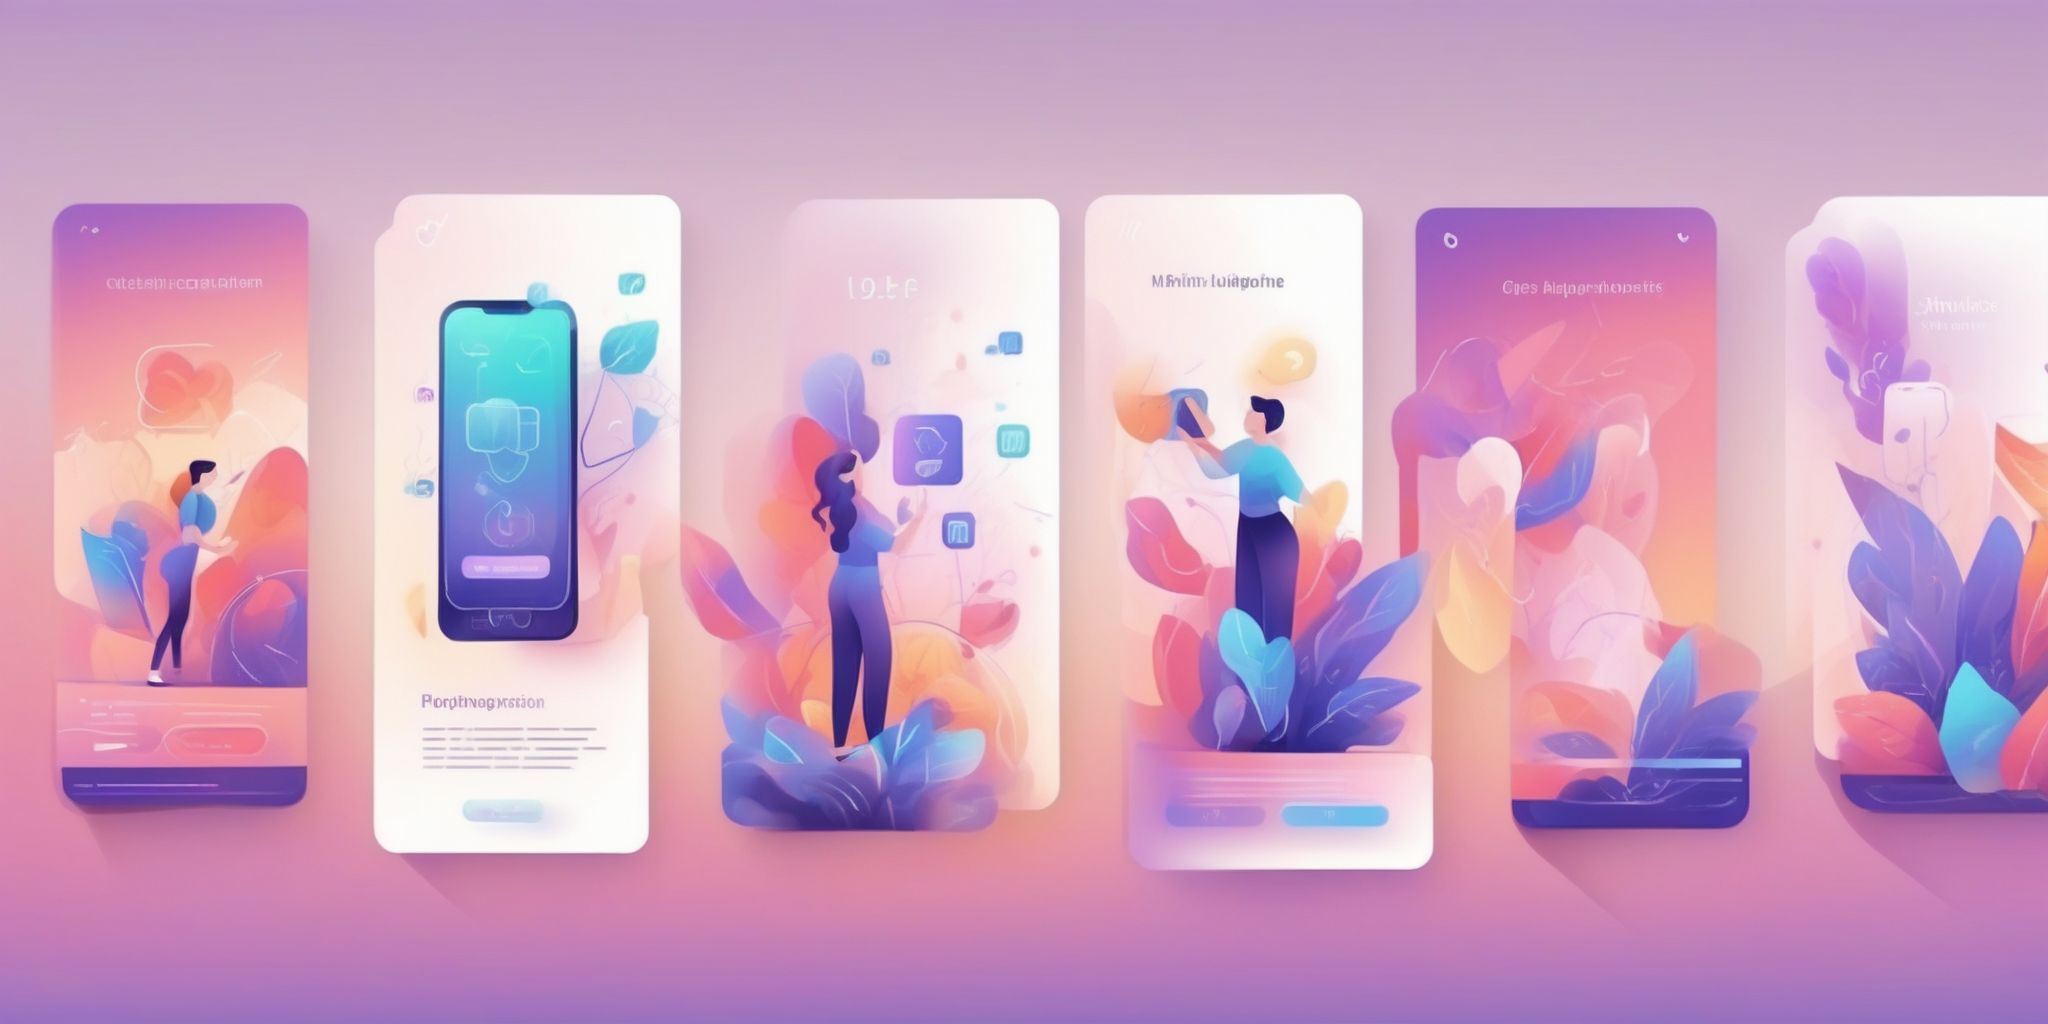 Mobile application in illustration style with gradients and white background